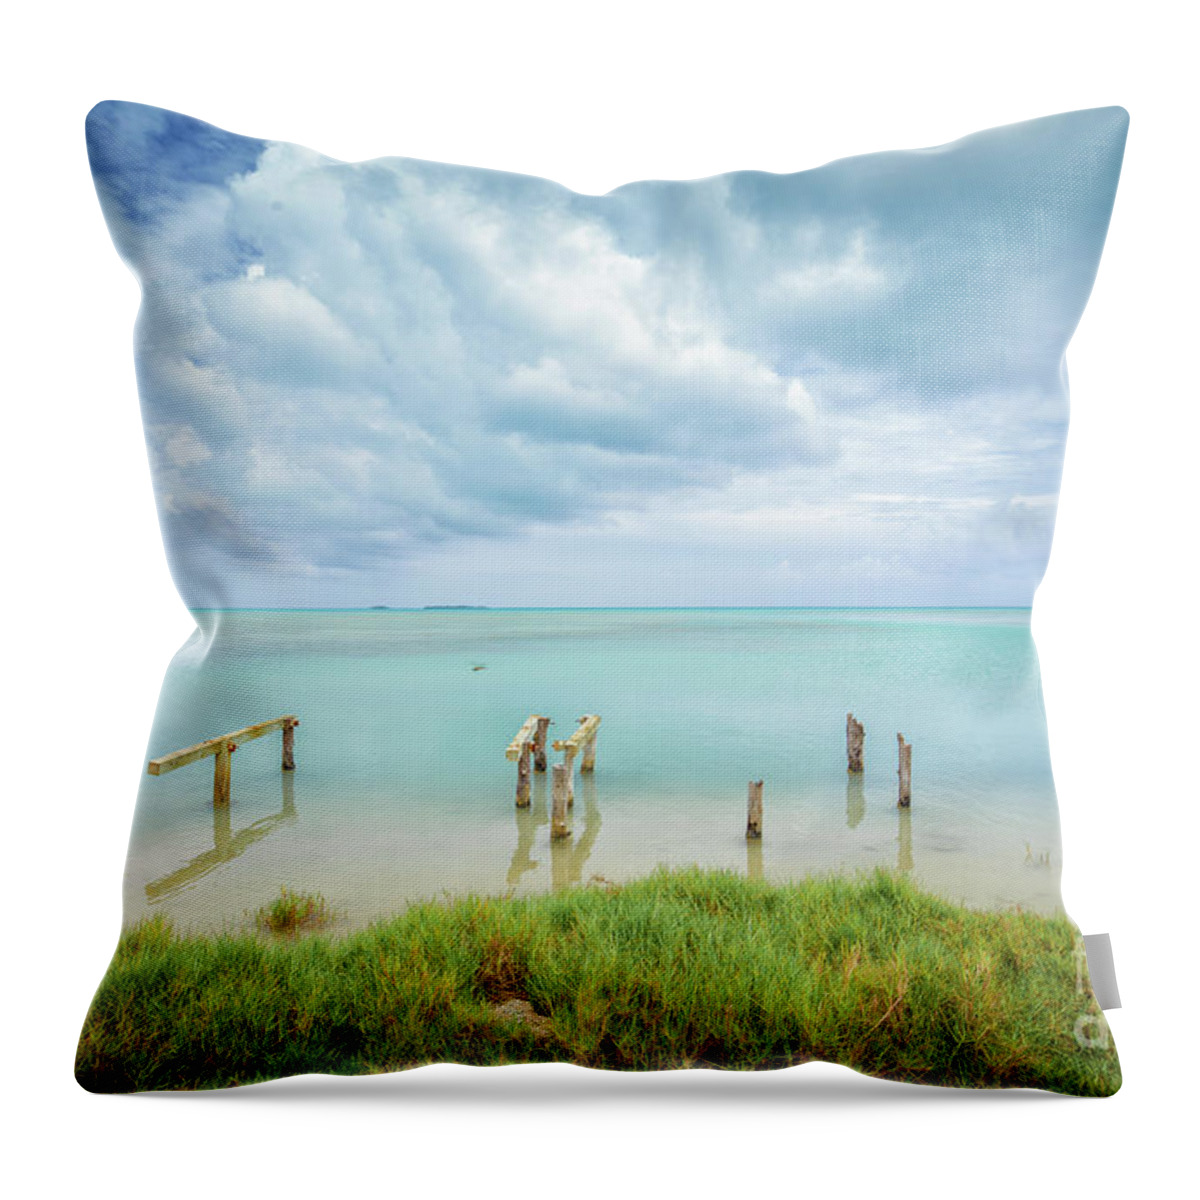 Ocean Throw Pillow featuring the photograph Paddleboard Hitching Post by Becqi Sherman